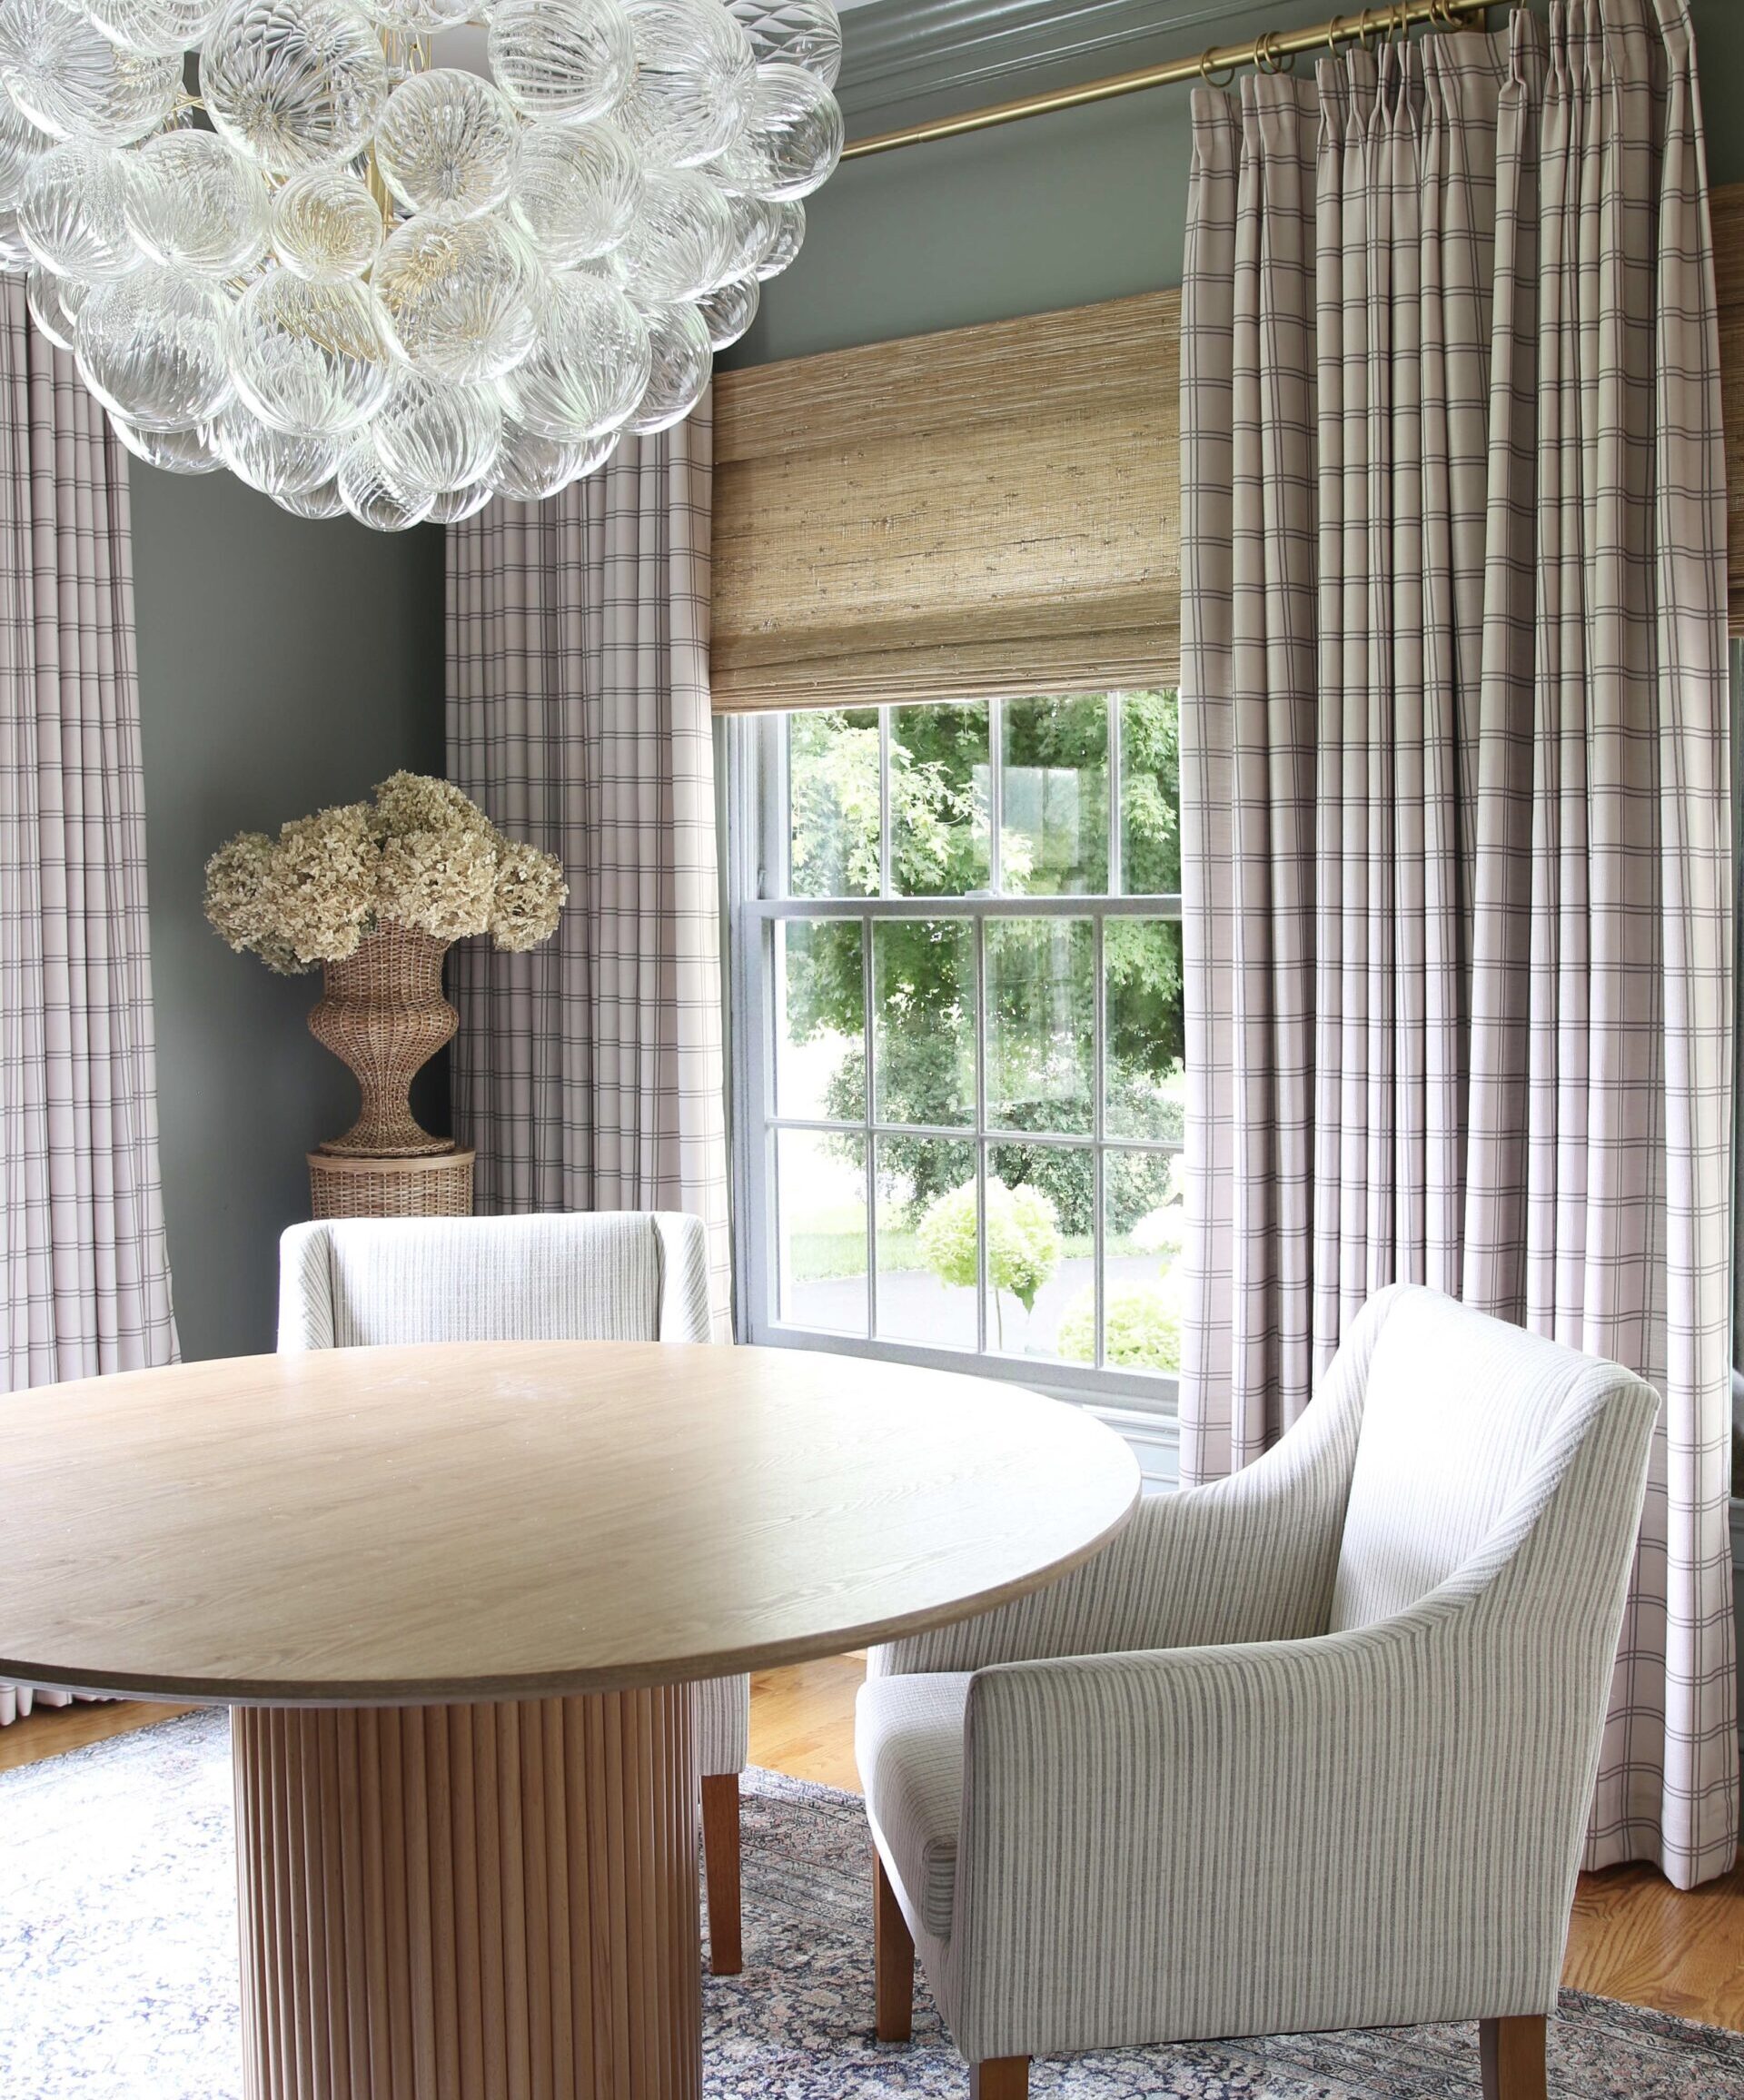 home office with drapes, woven shades, bubble light chandelier, walls and trim painted the same color demonstrating decorating trends someone might regret